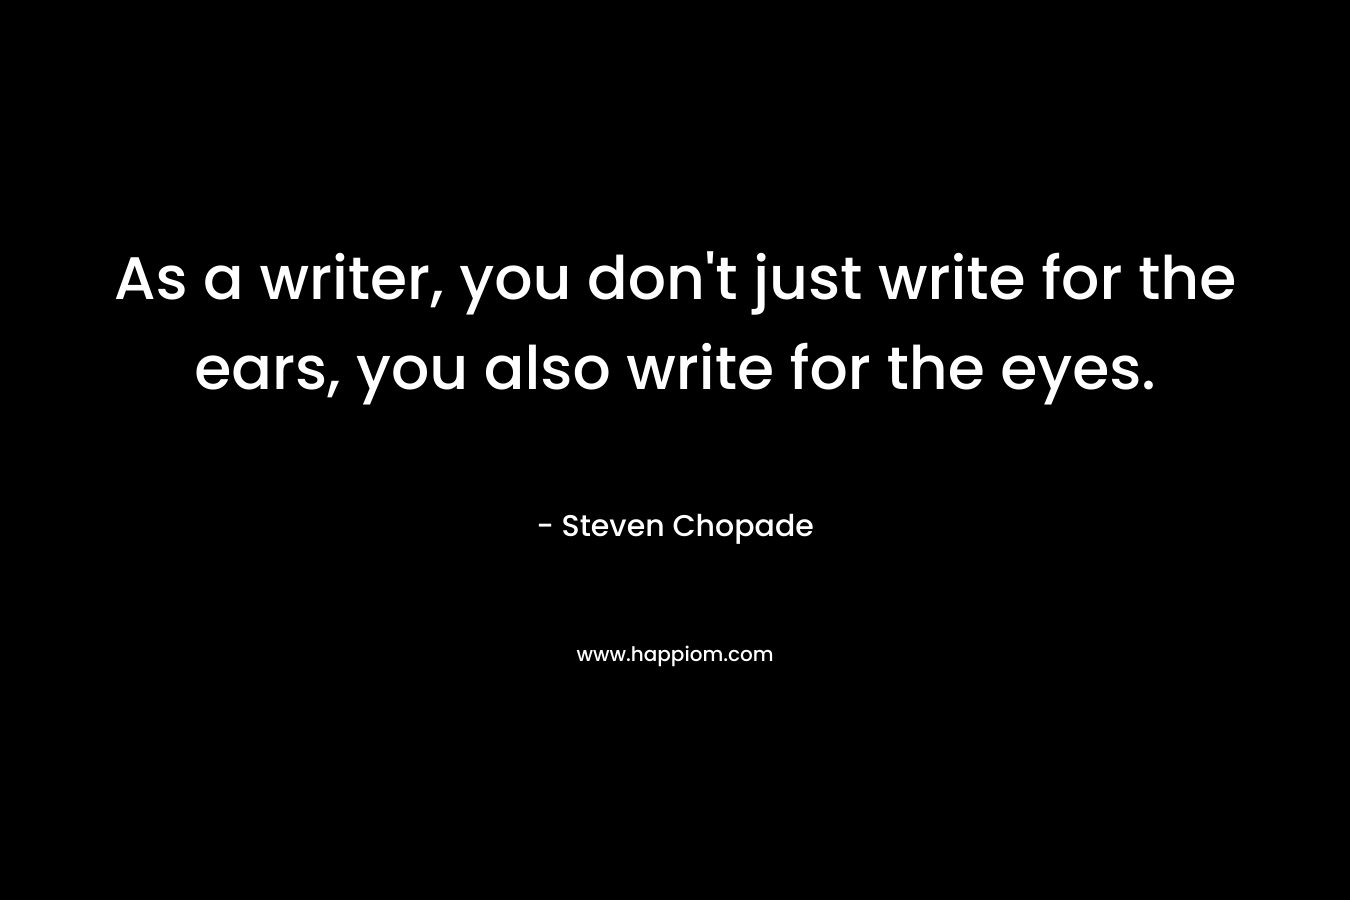 As a writer, you don’t just write for the ears, you also write for the eyes. – Steven Chopade